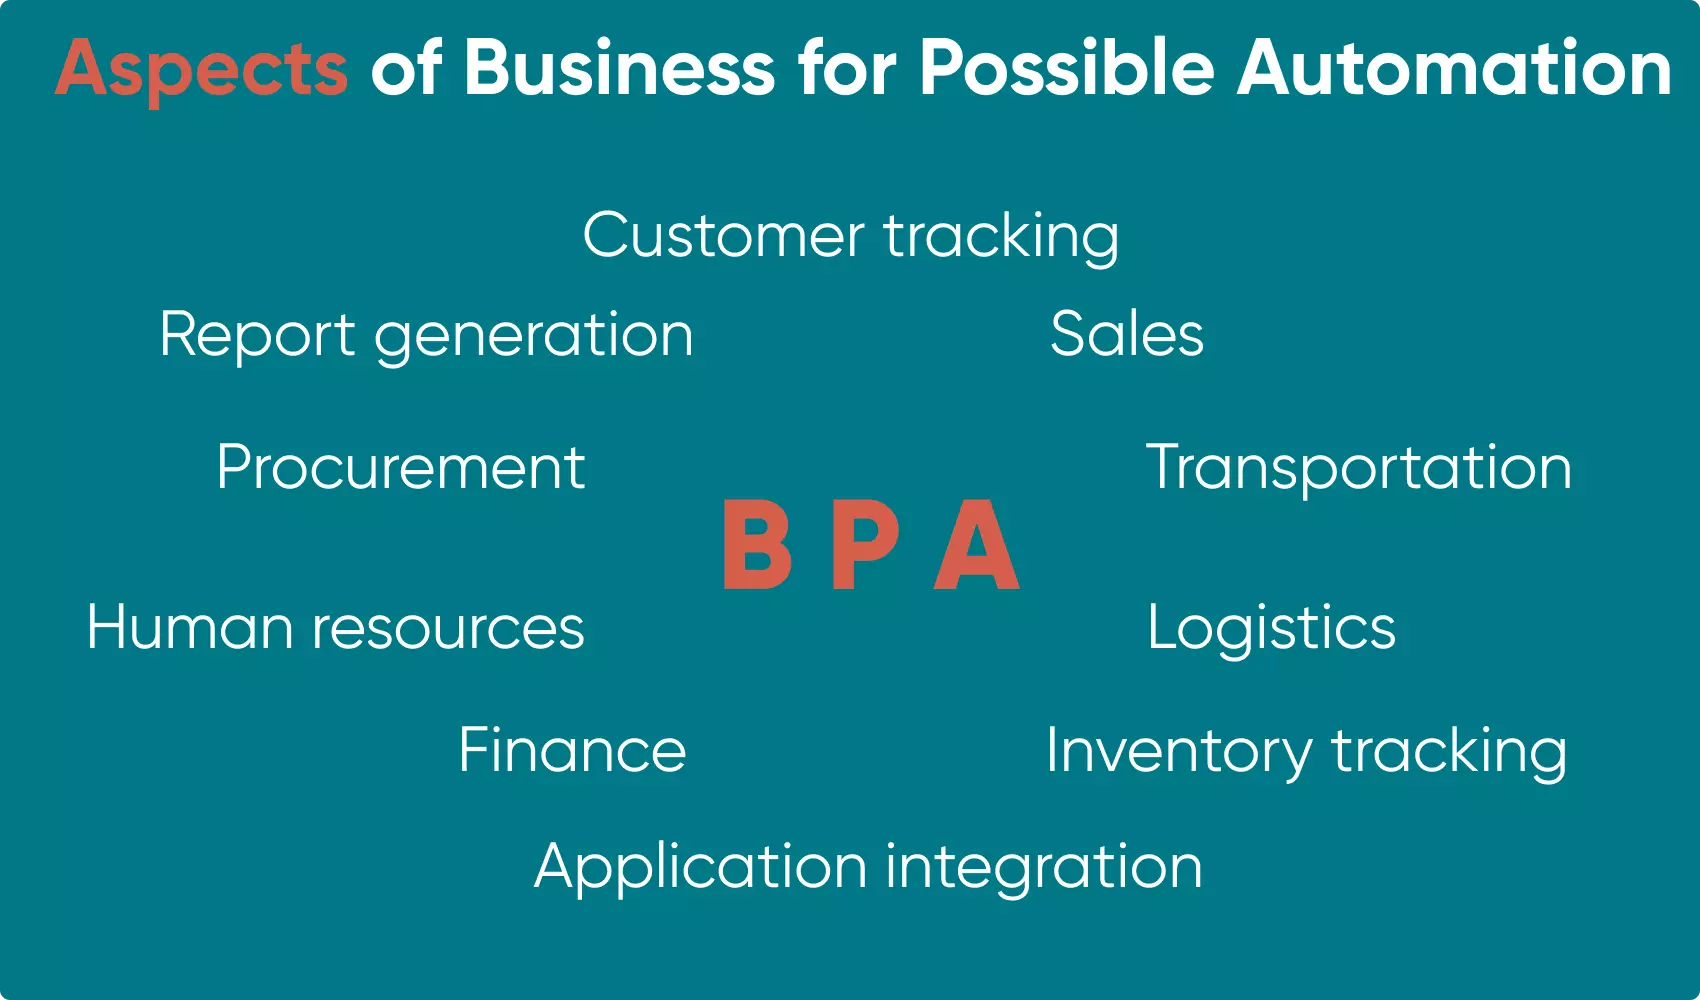 In more detail, a diagram showing aspects of a business suitable for BPA.